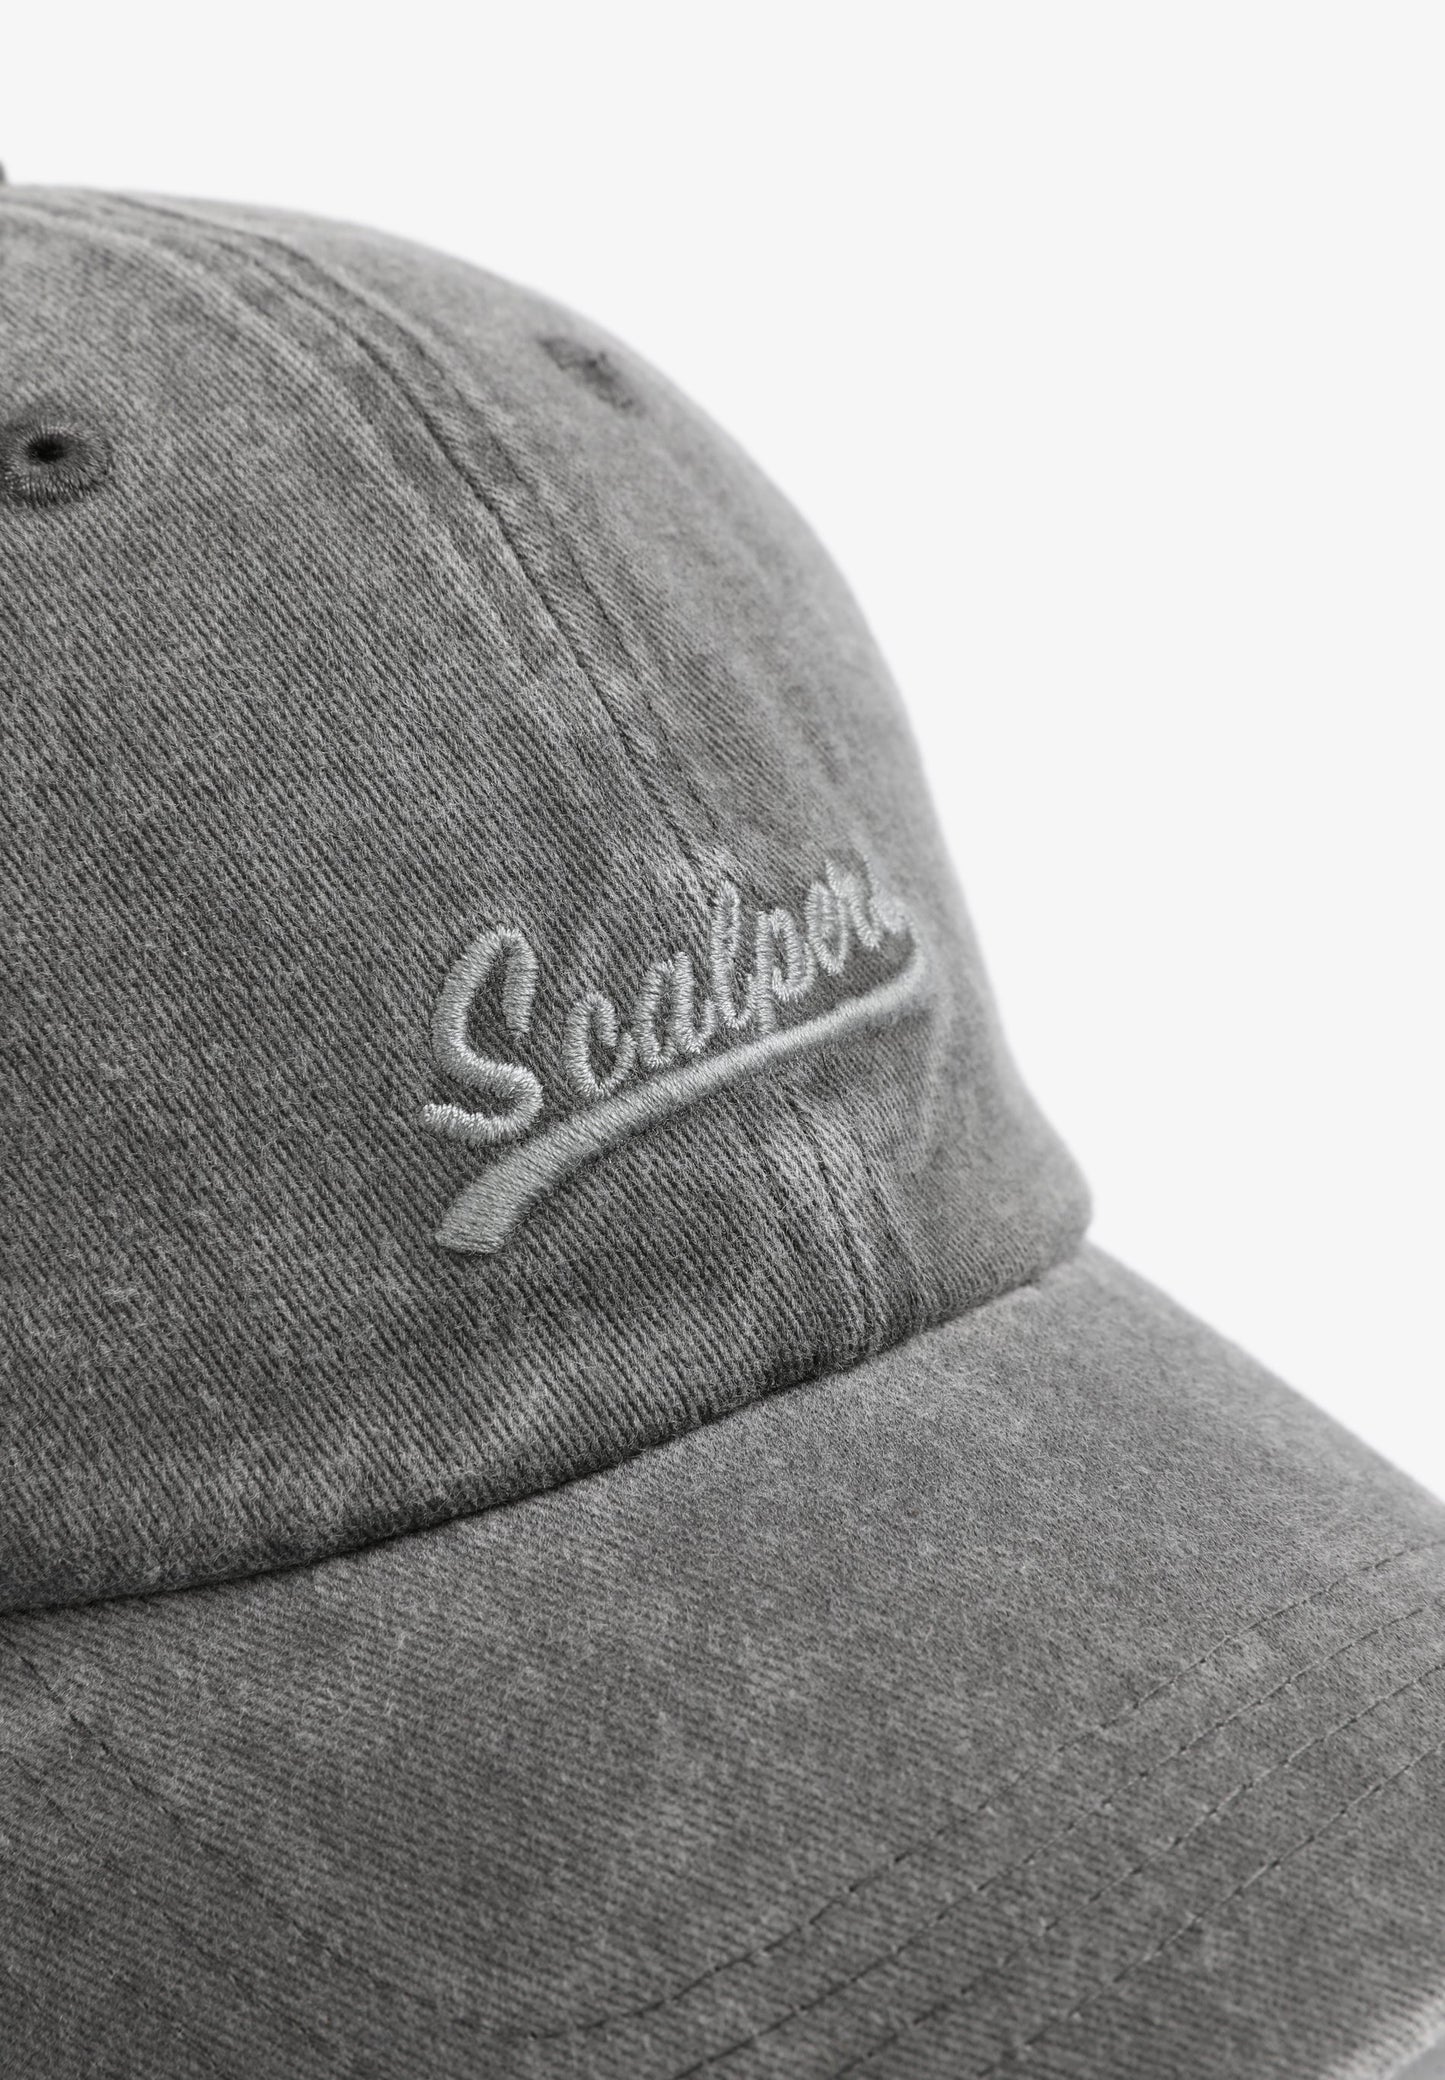 FADED CAP WITH EMBROIDERED FRONT LOGO